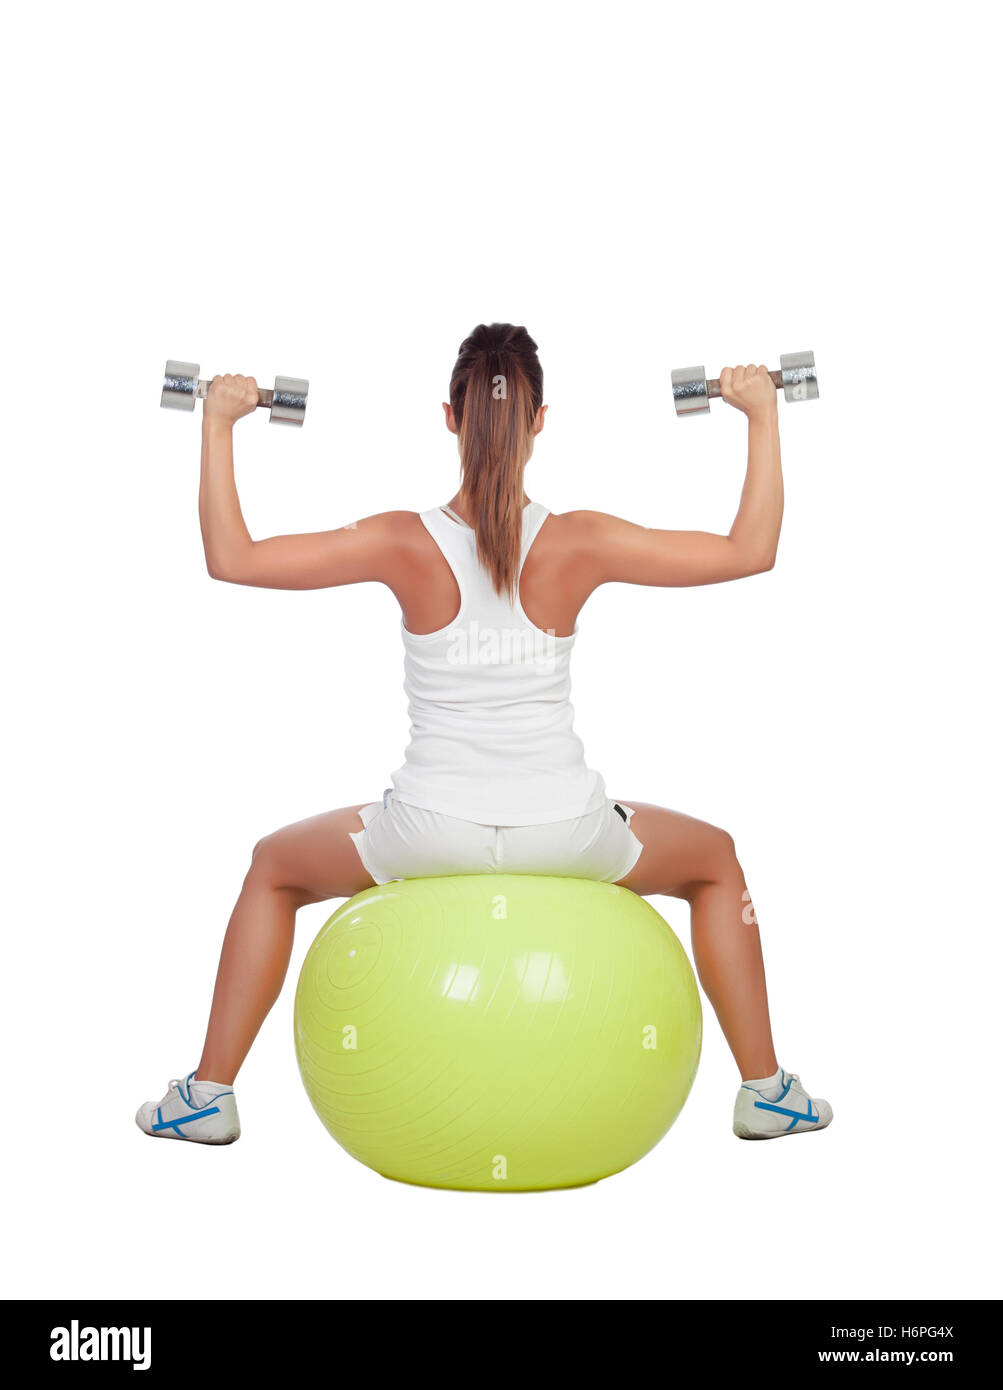 Attractive girl lifting weights sitting on a ball isolated on white background Stock Photo